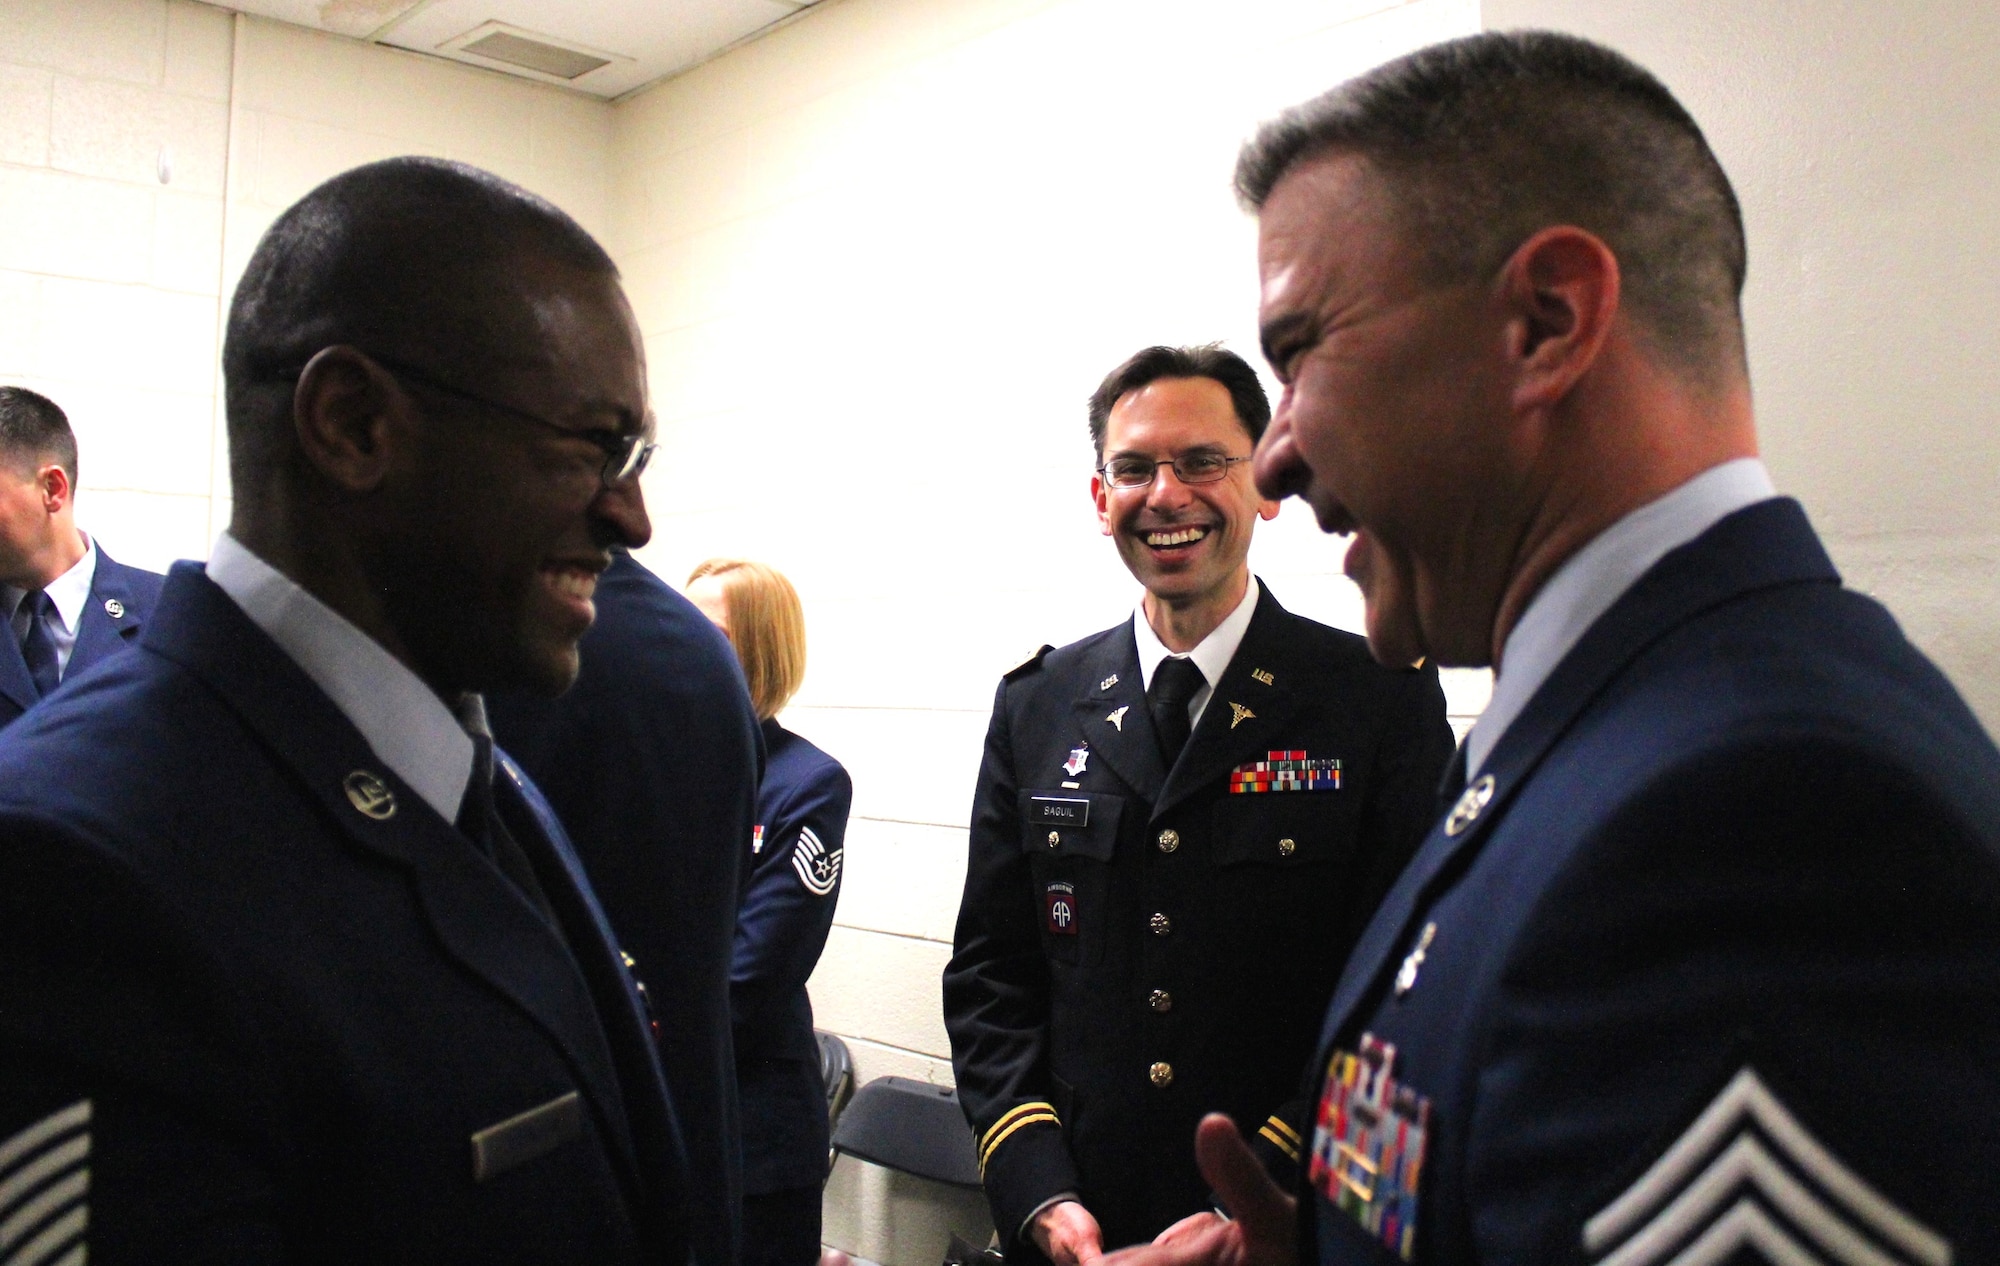 Chief Master Sgt. E. Jason Pace (right) and Tech. Sgt. Kenneth Johnson (left) meet backstage before the commencement ceremony held at George Mason University on May 11, 2016. EMDP2 graduation was a particularly memorable event for Chief Master Sgt. Pace, who got to witness his mentee, Tech. Sgt. Johnson cross the next milestone on his way to medical school. (U.S. Air Force photo by Prerana Korpe, AFMS Public Affairs)